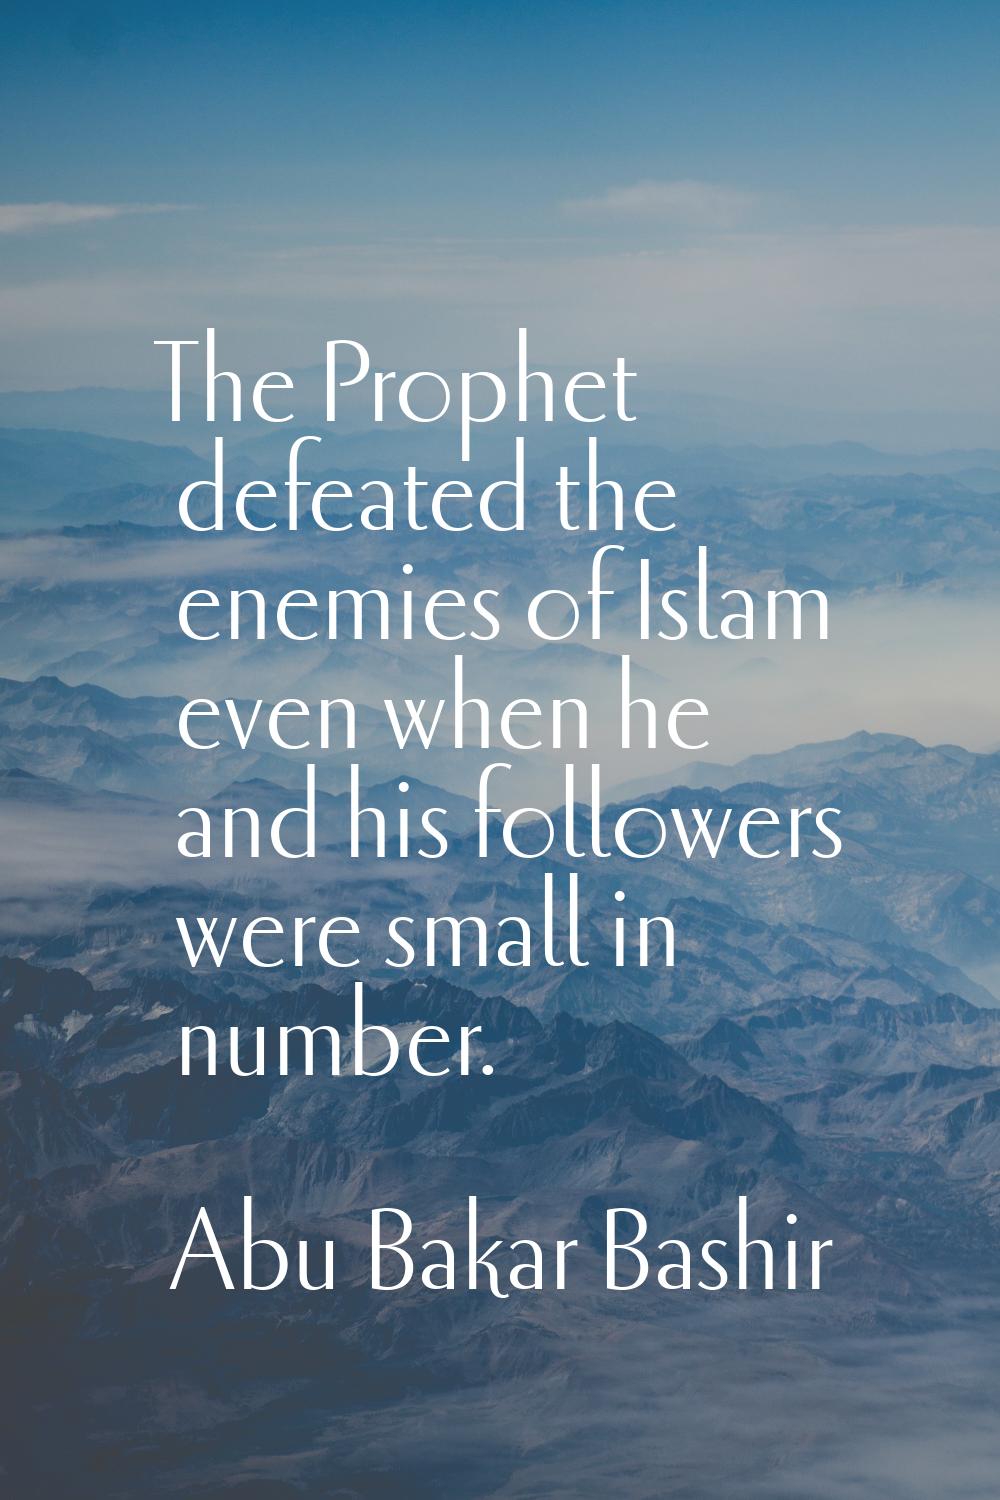 The Prophet defeated the enemies of Islam even when he and his followers were small in number.